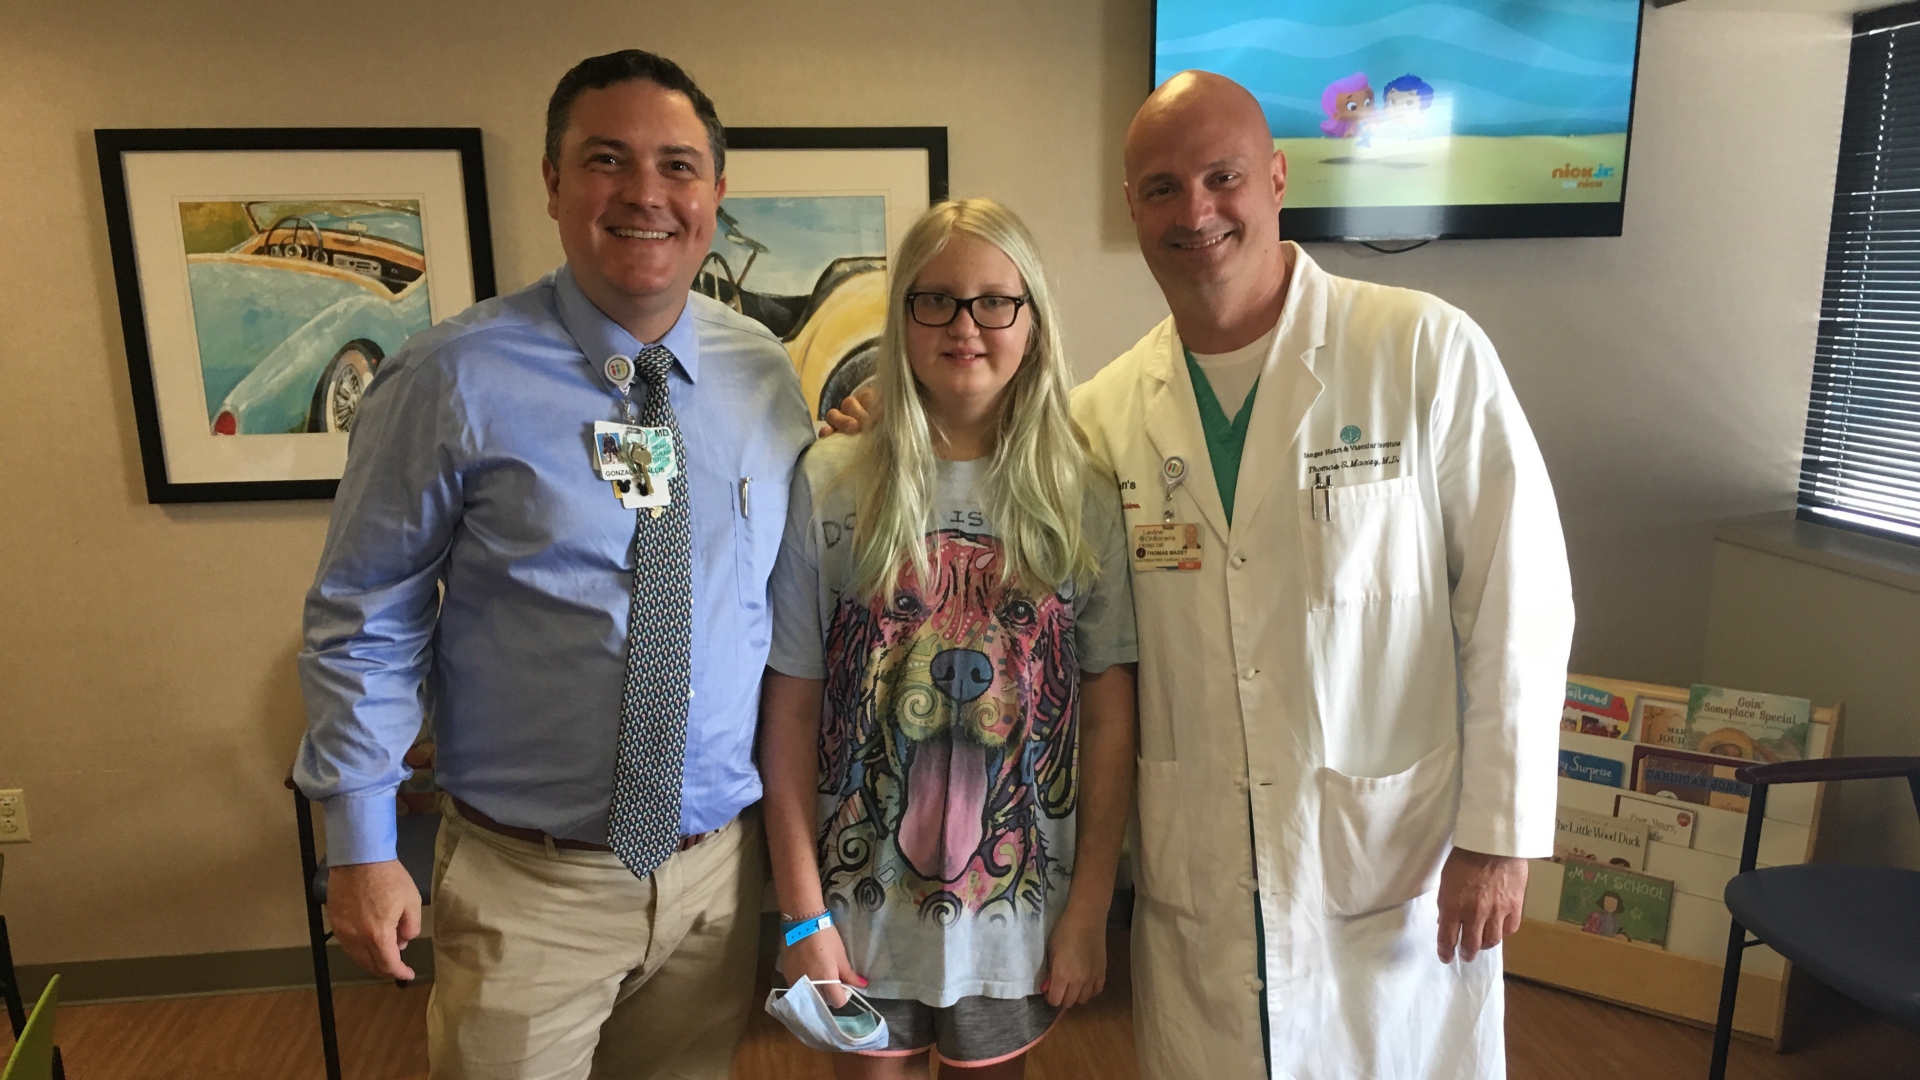 When 14-year-old Megan Edney received a heart transplant at Levine Children’s Hospital, her doctors found something more: a rare genetic disorder that plagued her health for years. Discover her remarkable story – and the brighter future now ahead of her.